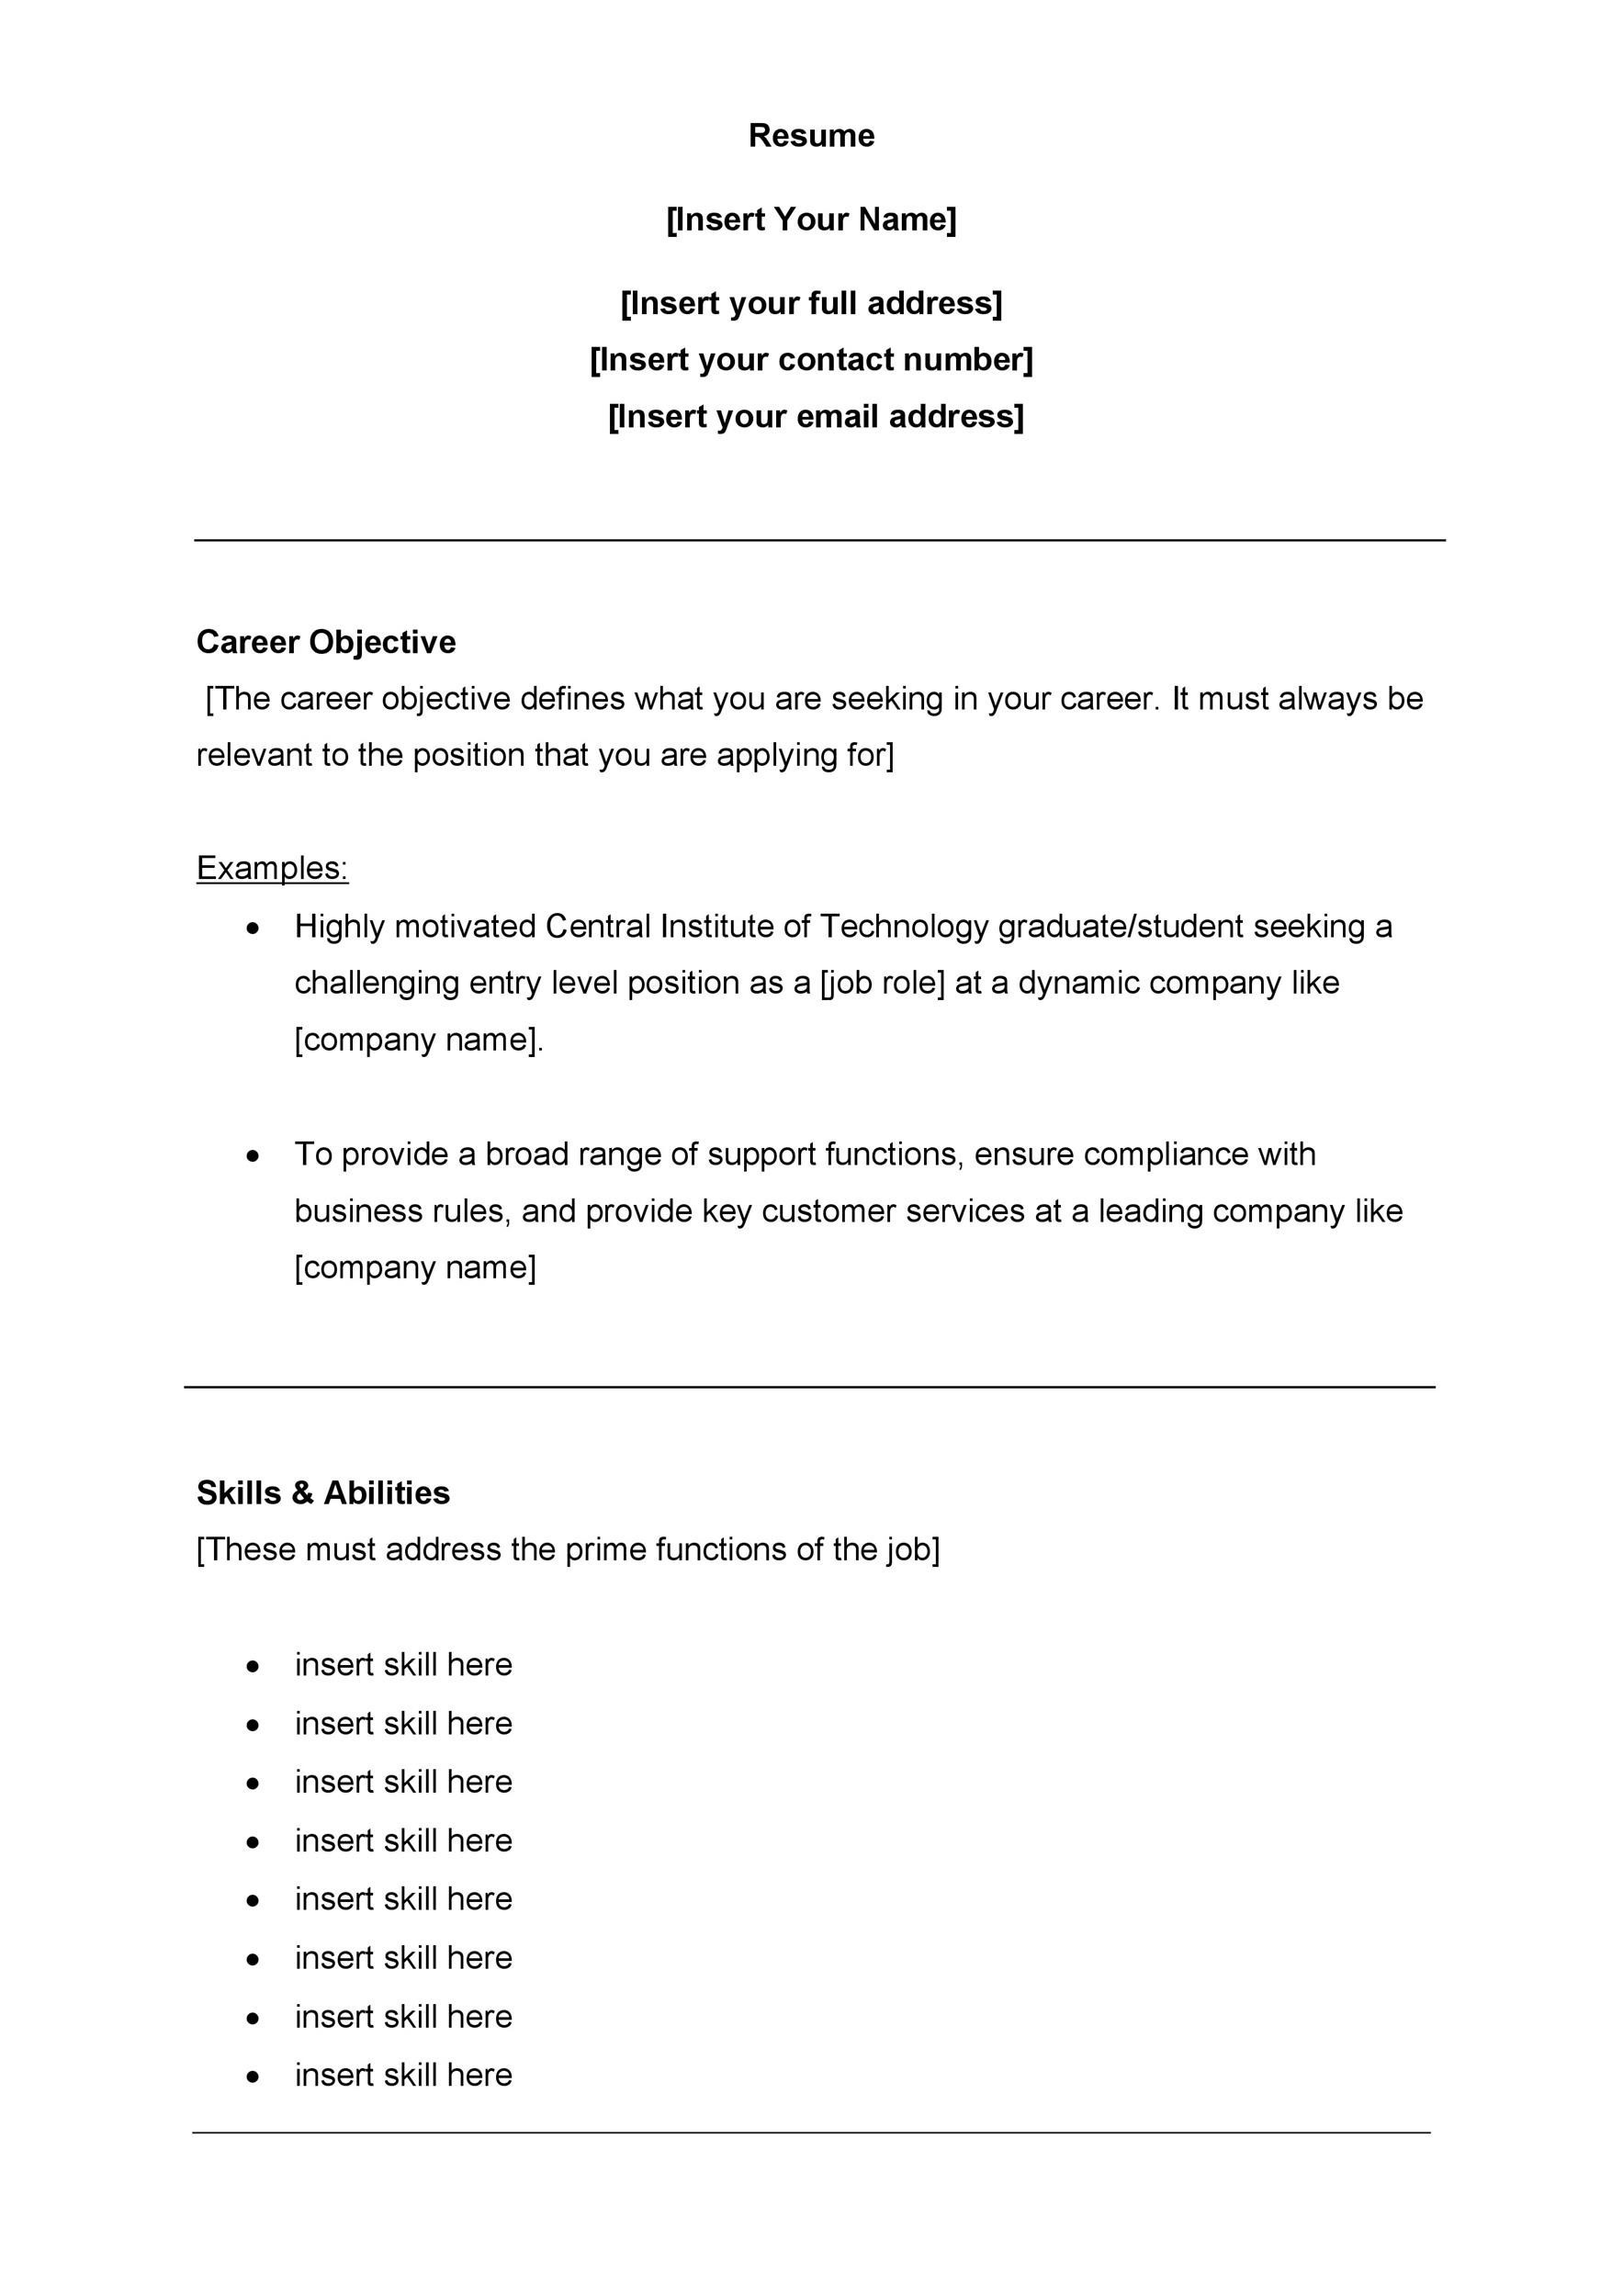 Resume Templates for Customer Service Jobs 30lancarrezekiq Customer Service Resume Examples á Templatelab